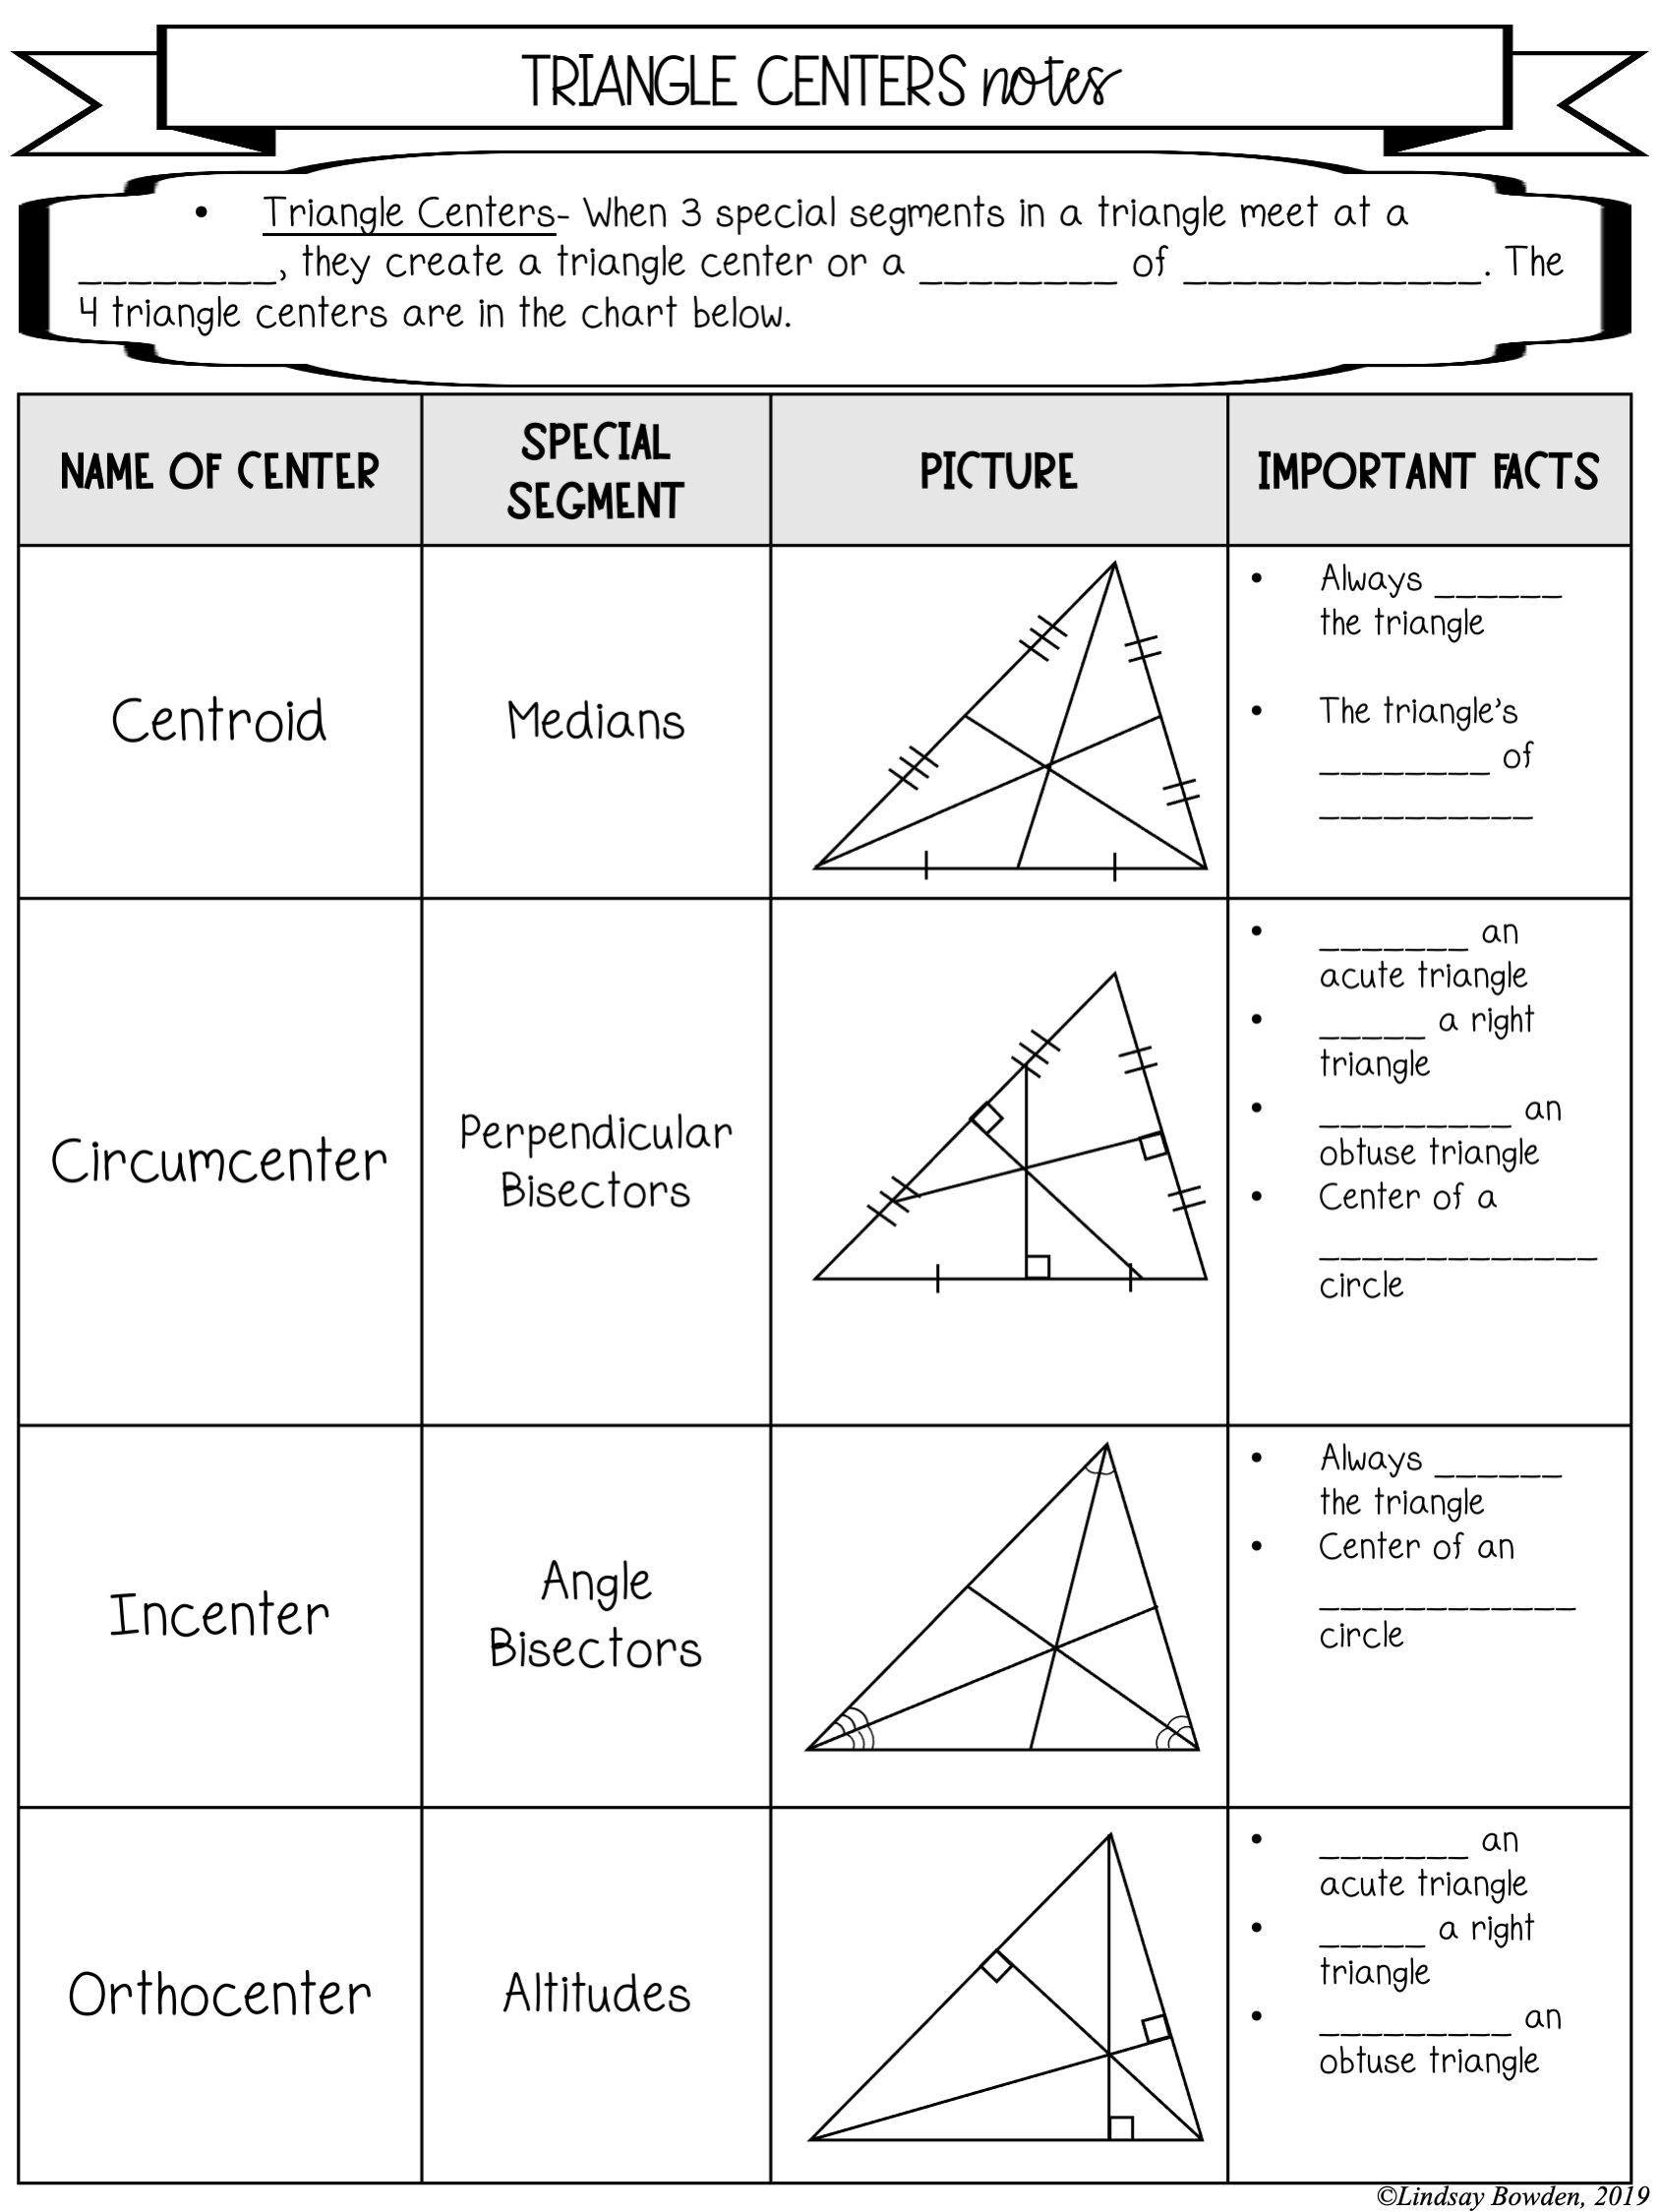 Triangle Centers Notes and Worksheets - Lindsay Bowden Intended For Centers Of Triangles Worksheet